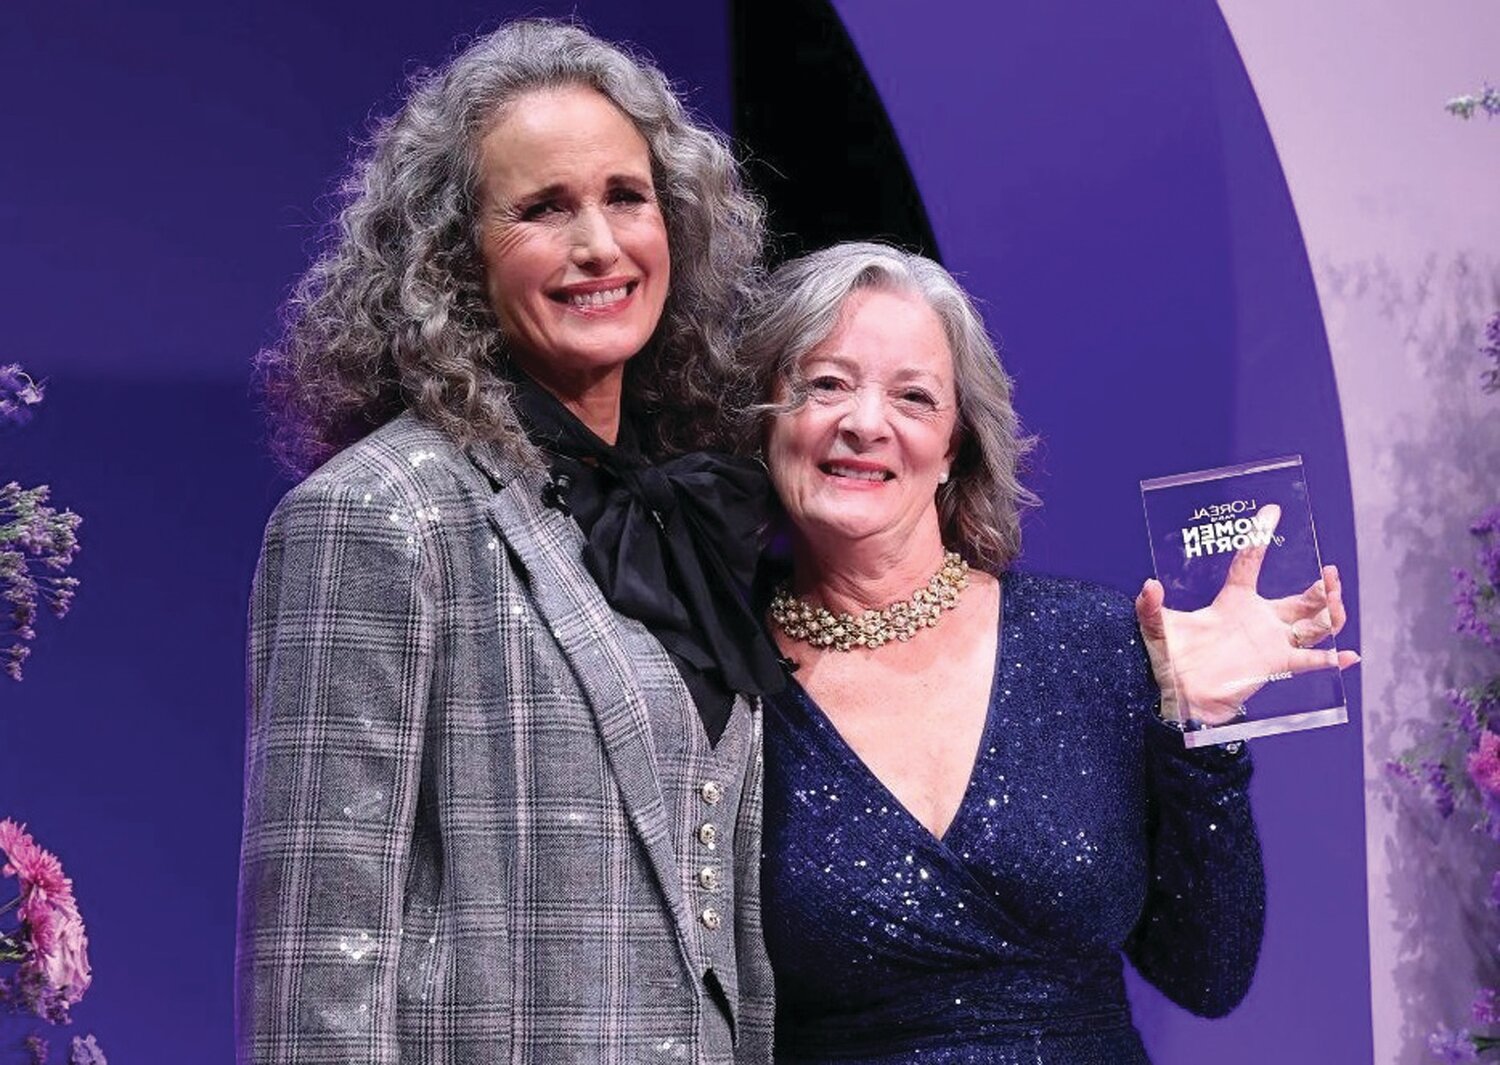 Actress and L’Oreal Paris spokeswoman Andie MacDowell presented Cass Forkin, founder and president of Jamison-based Twilight Wish Foundation, with her “Women of Worth” award.